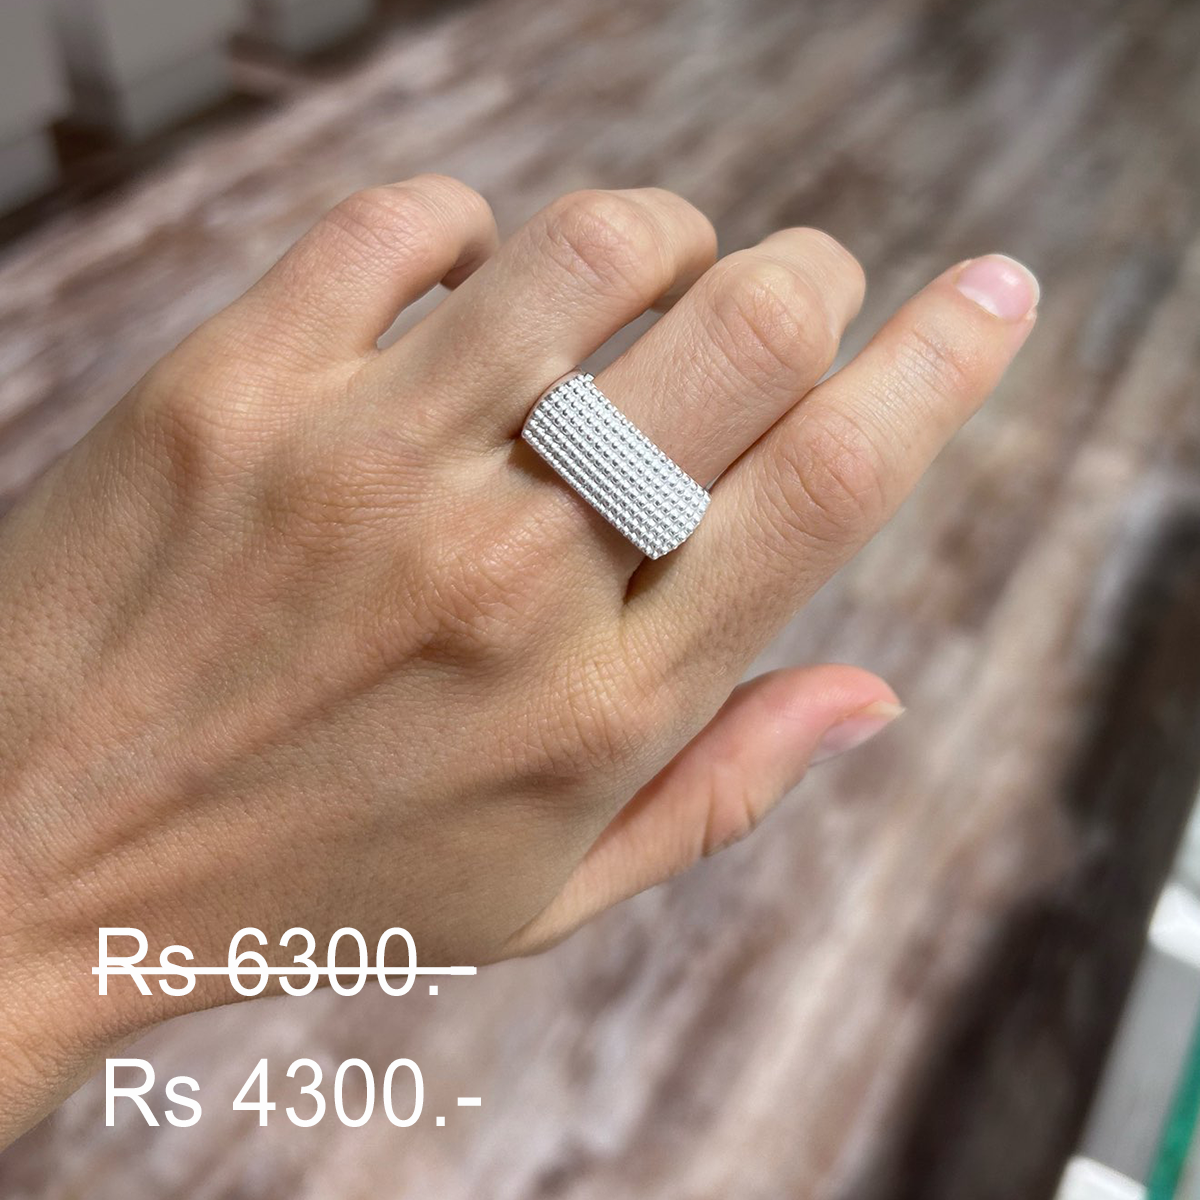 Discounted bubble ring